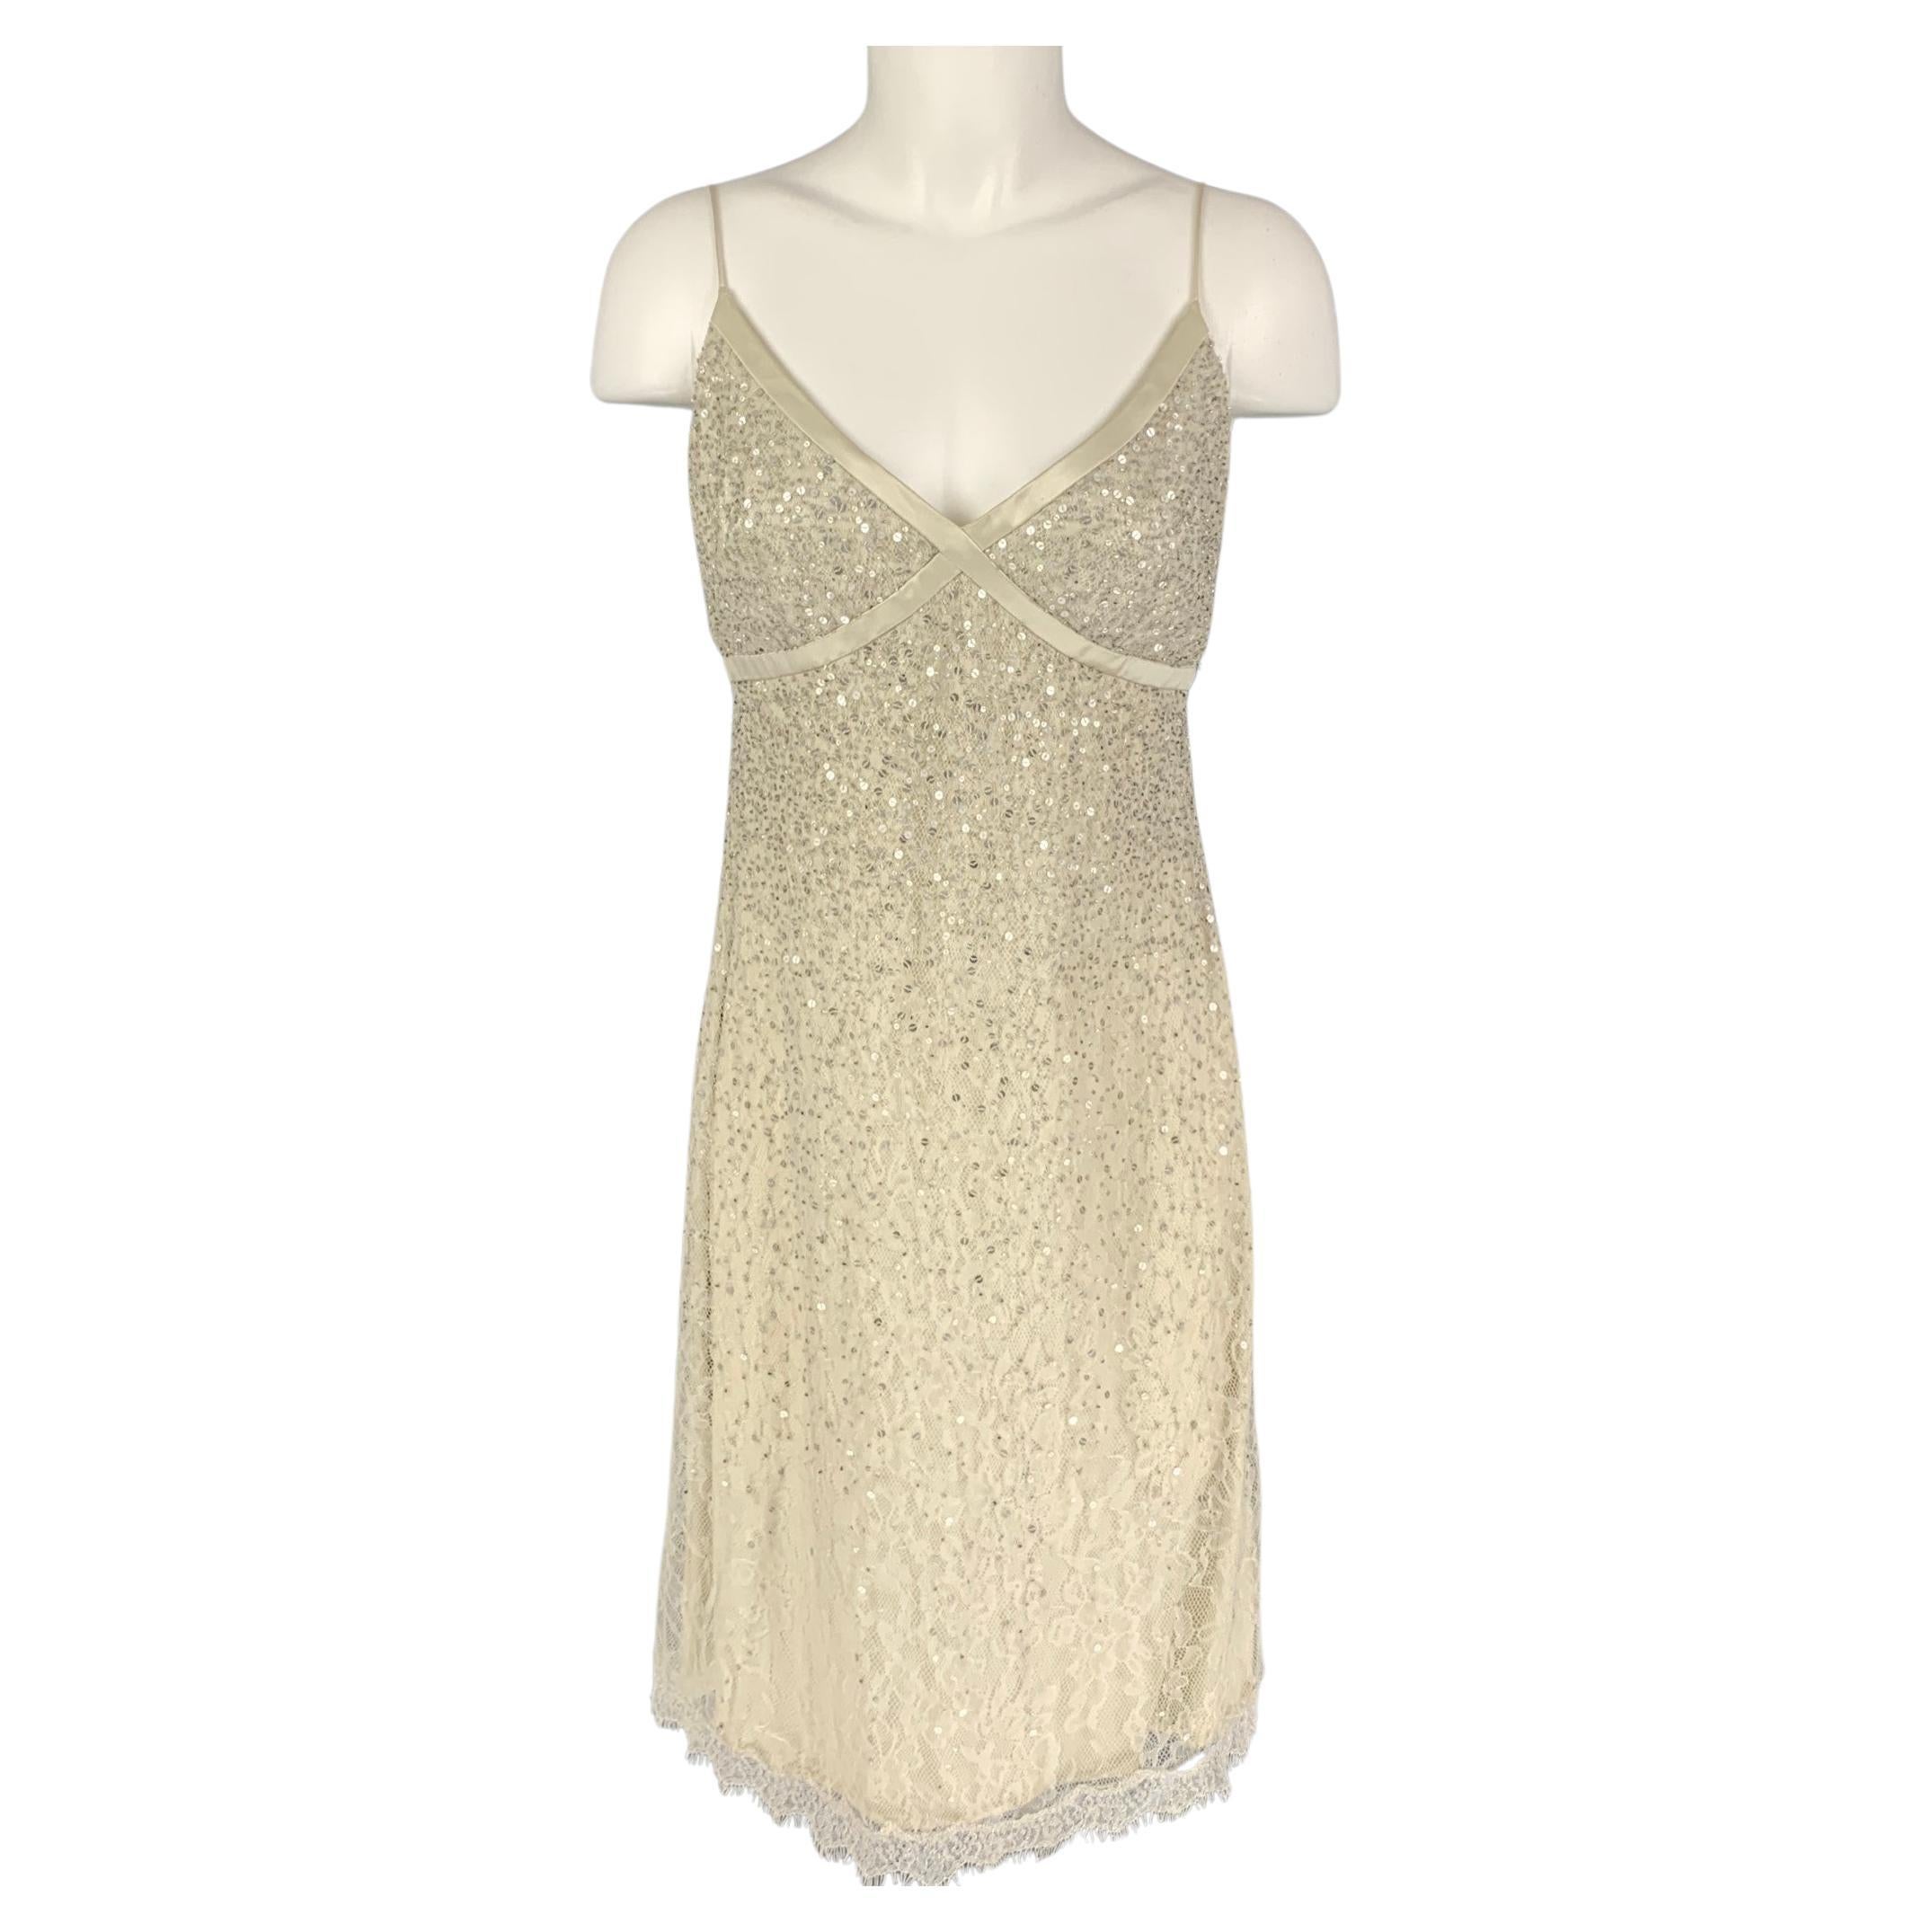 CARMEN MARC VALVO Size 6 Off White Lace Sequined Spaghetti Straps Cocktail Dress